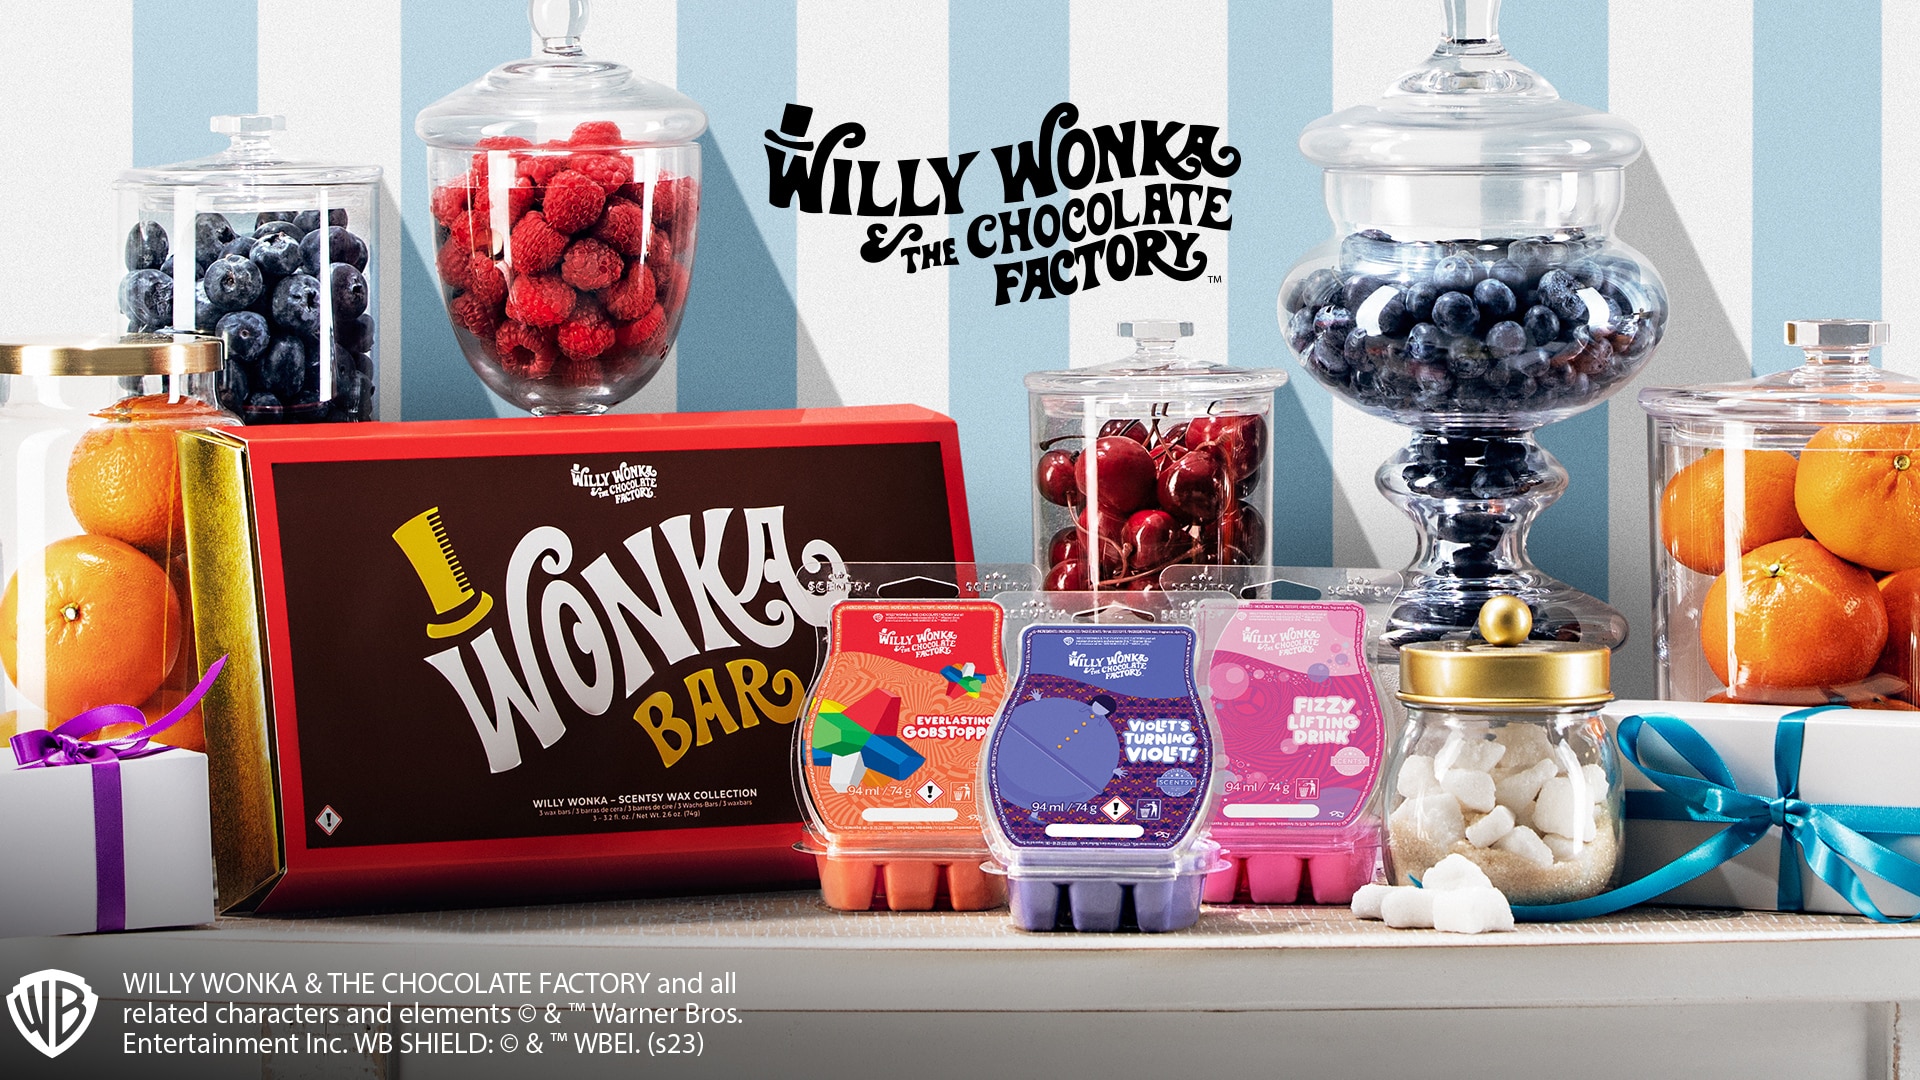 Willy Wonka Scentsy Wax Collection